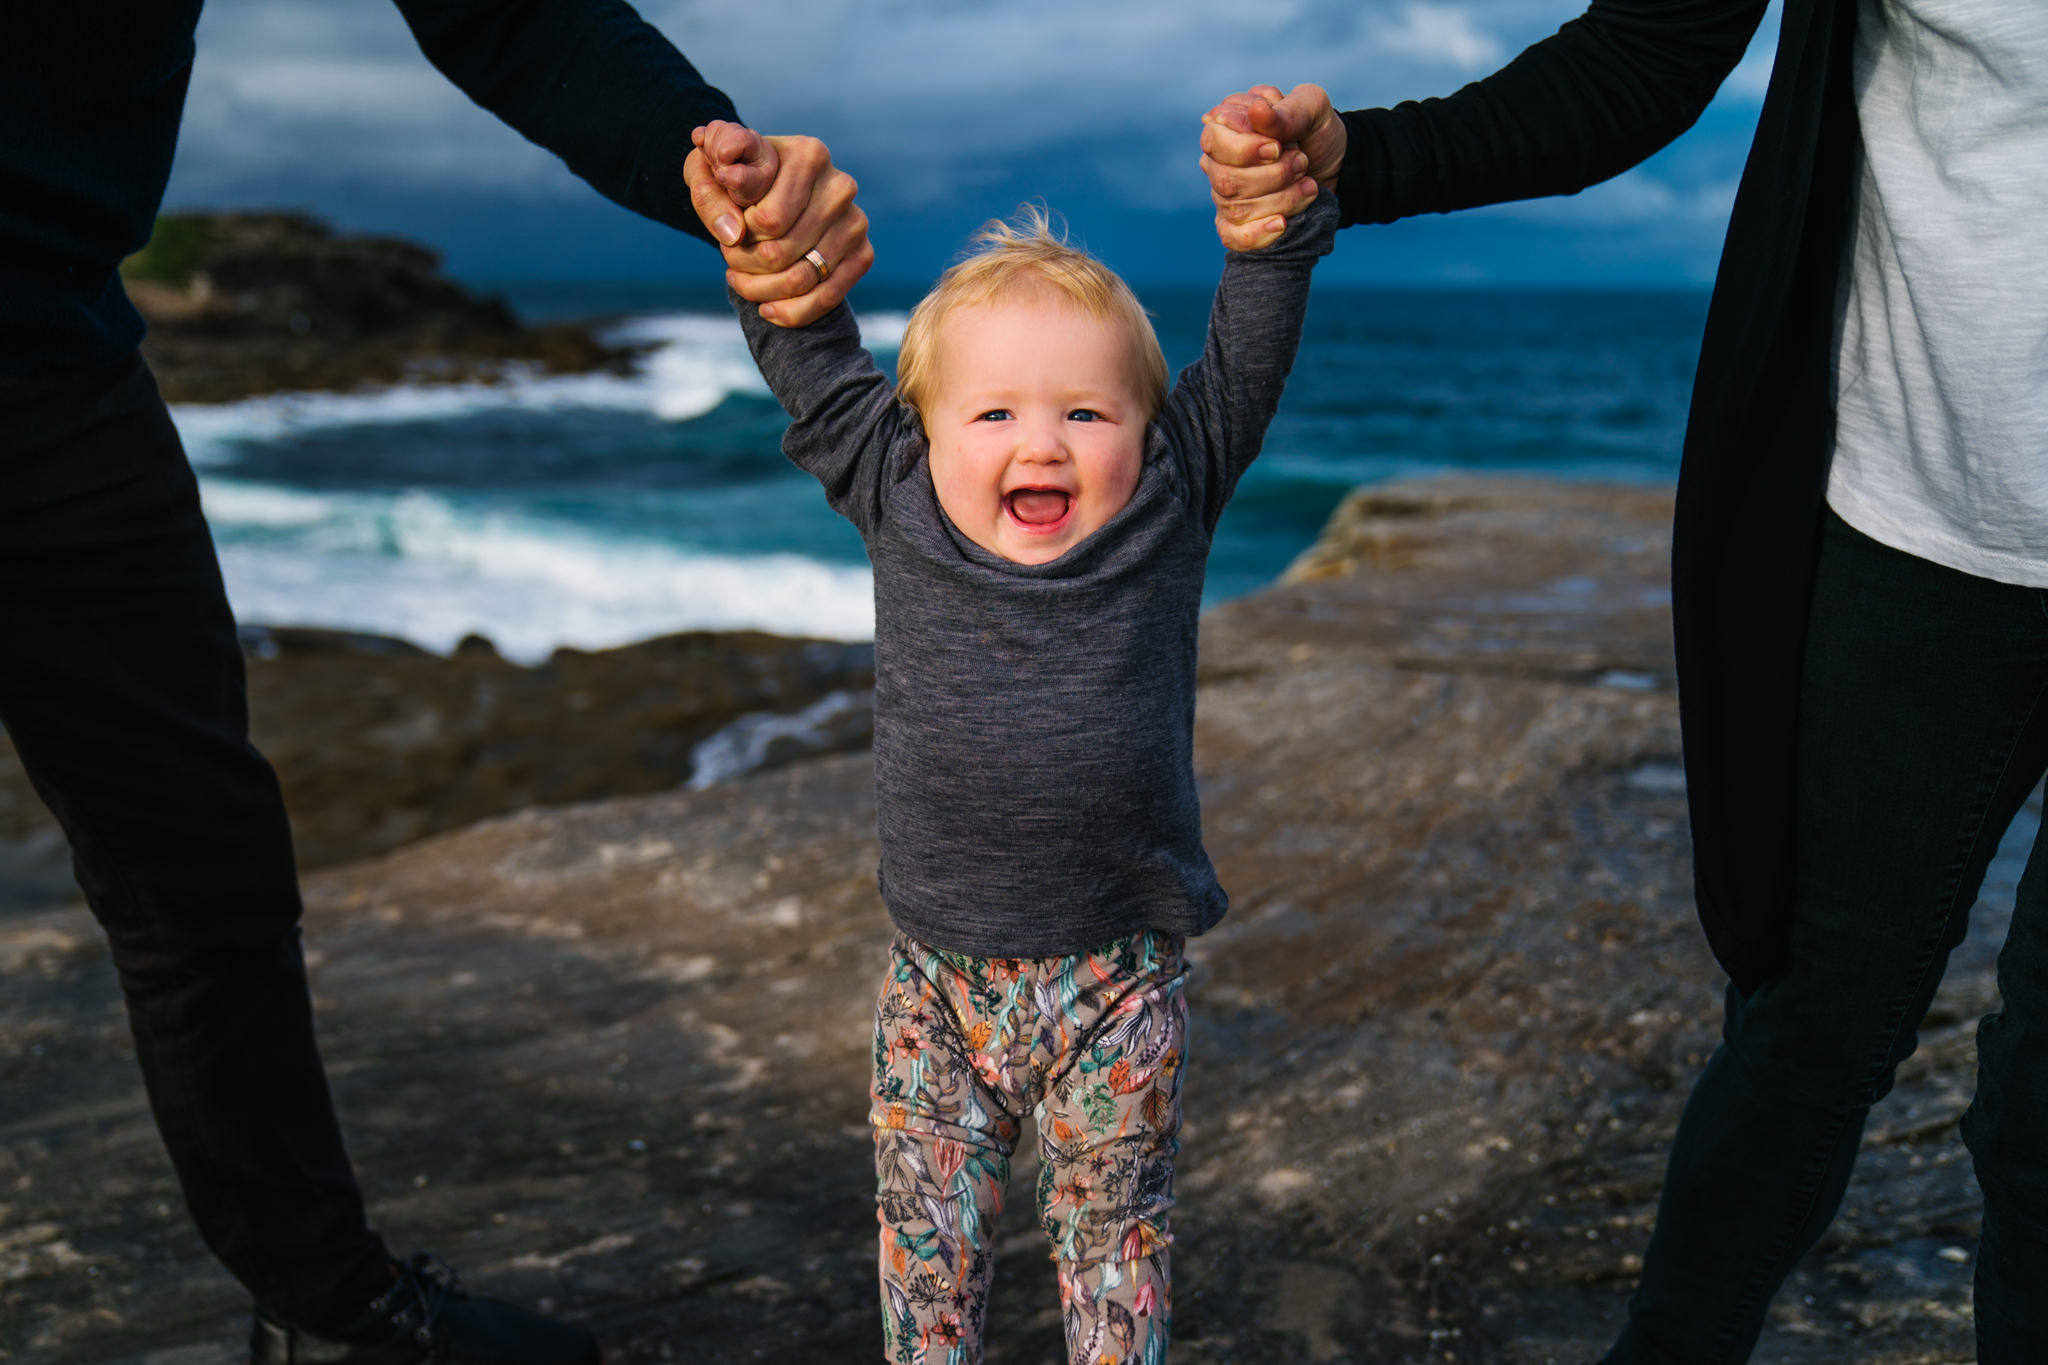 One year old girl laughing as she is held between her parents during family photography session